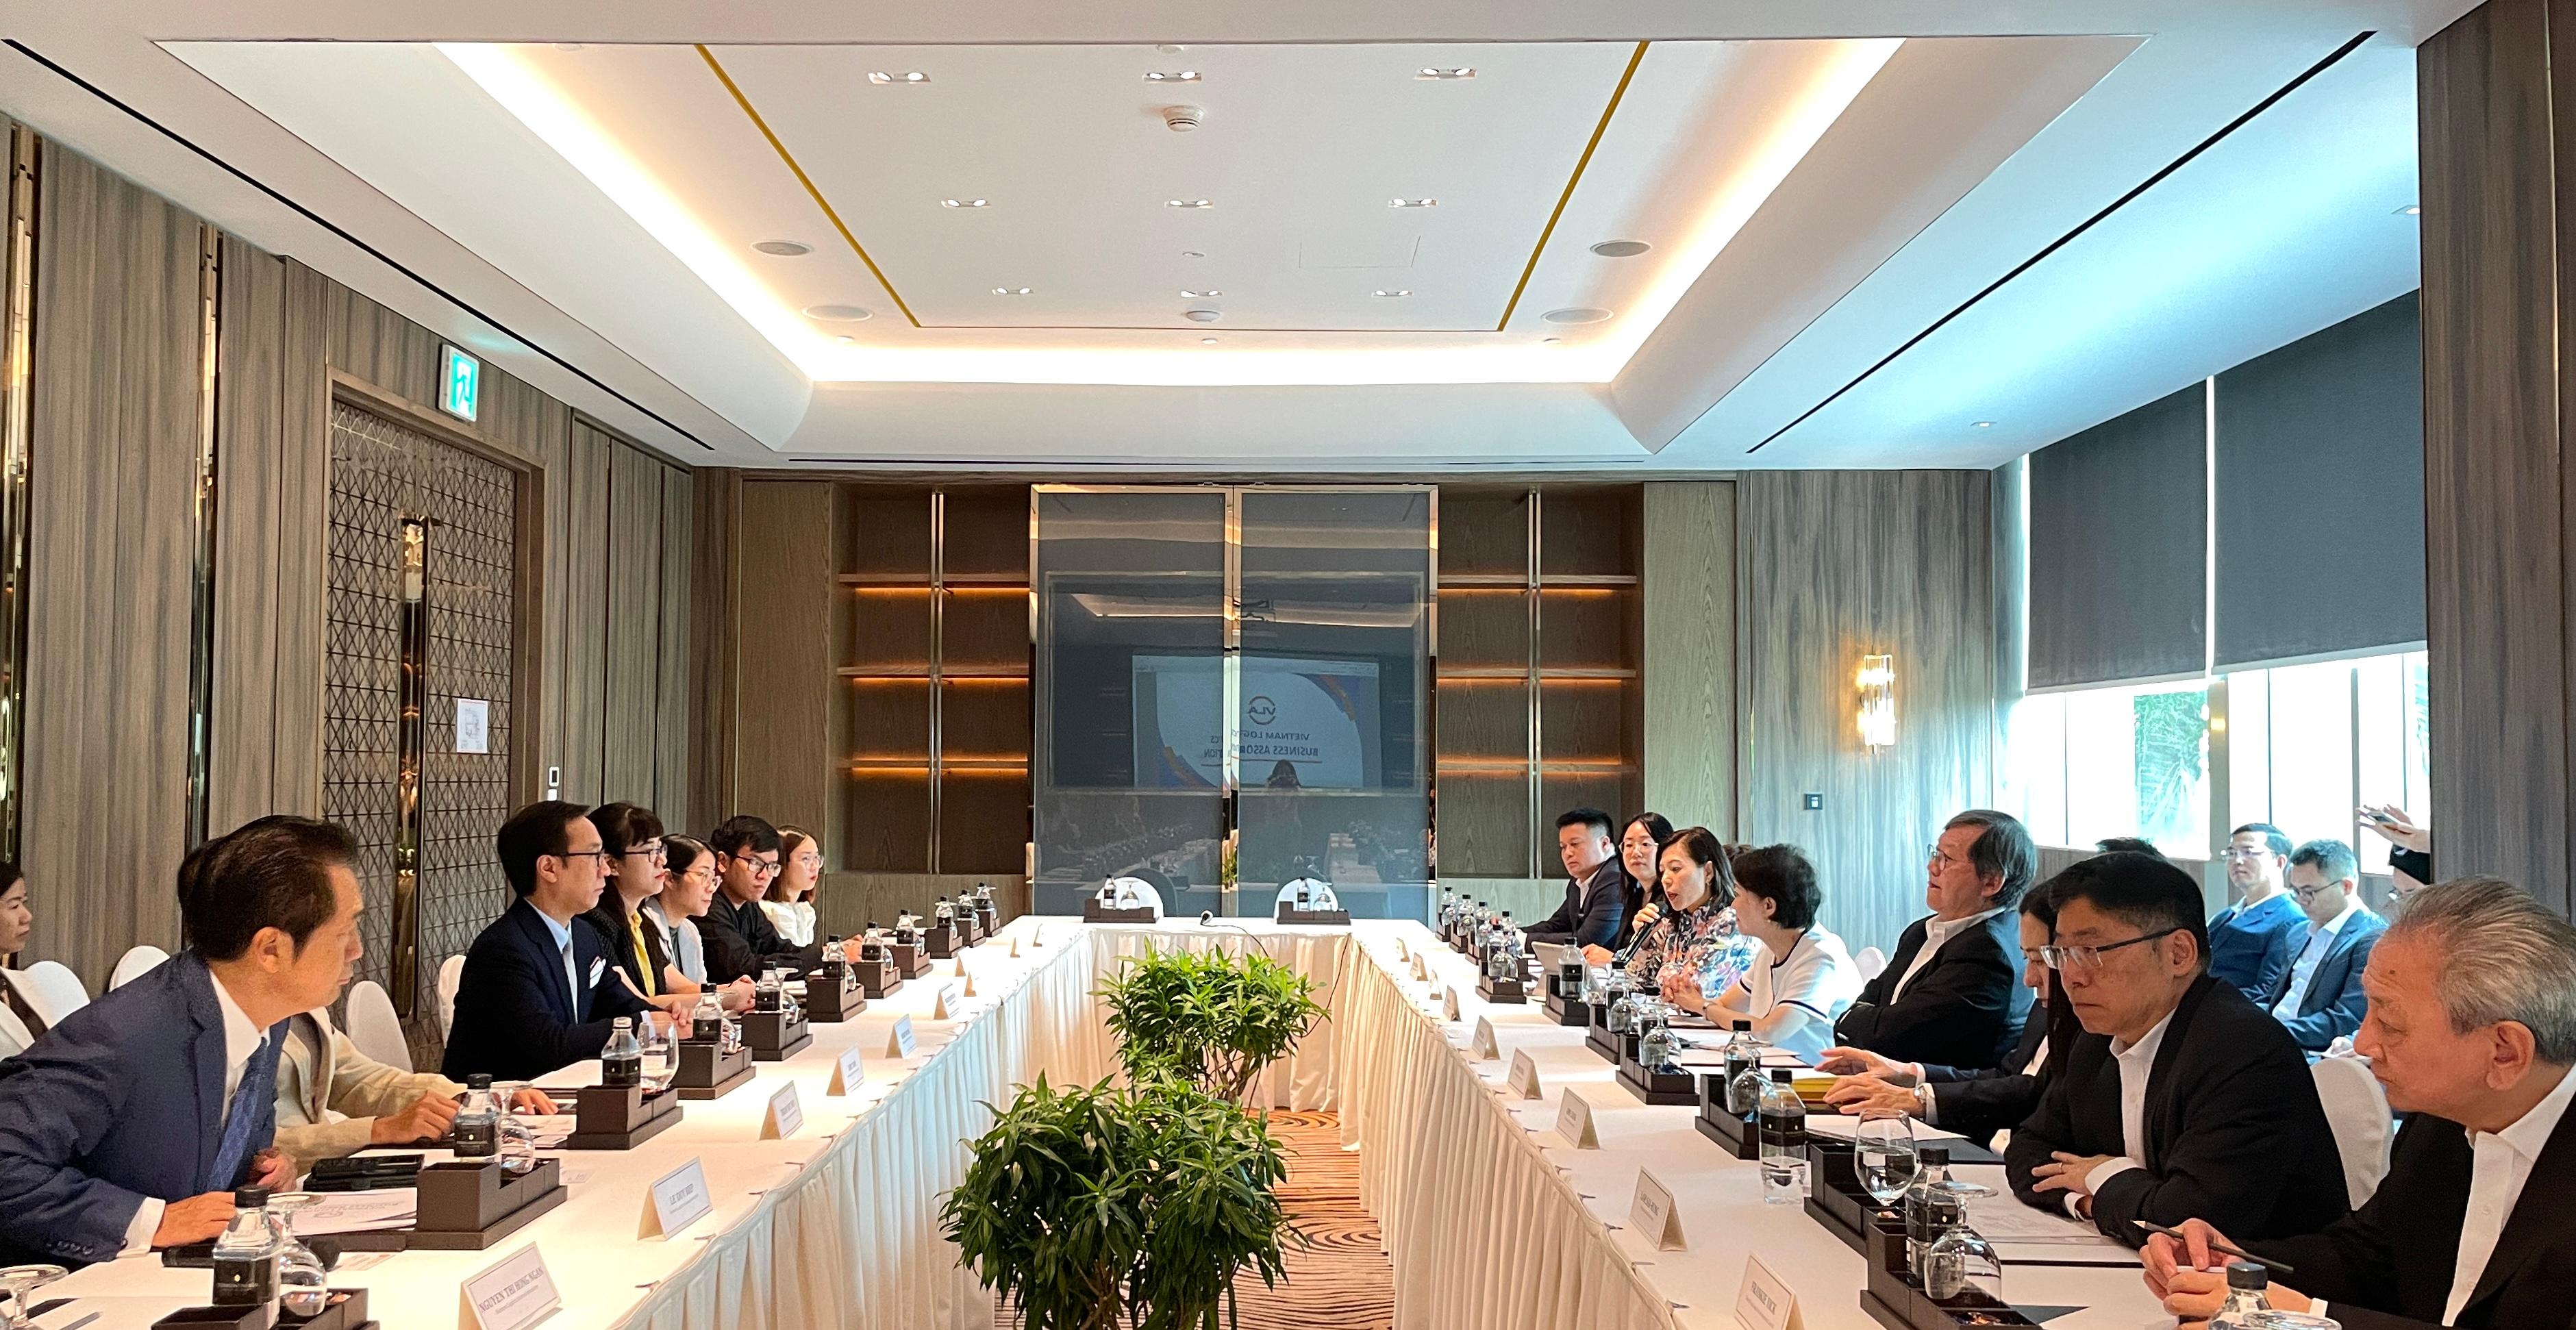 The Secretary for Transport and Logistics, Mr Lam Sai-hung (second right), led a delegation comprising more than 10 members of the Hong Kong Logistics Development Council to continue their visit to Ho Chi Minh City, Vietnam, and meet with representatives from the Vietnam Logistics Business Association today (October 12).